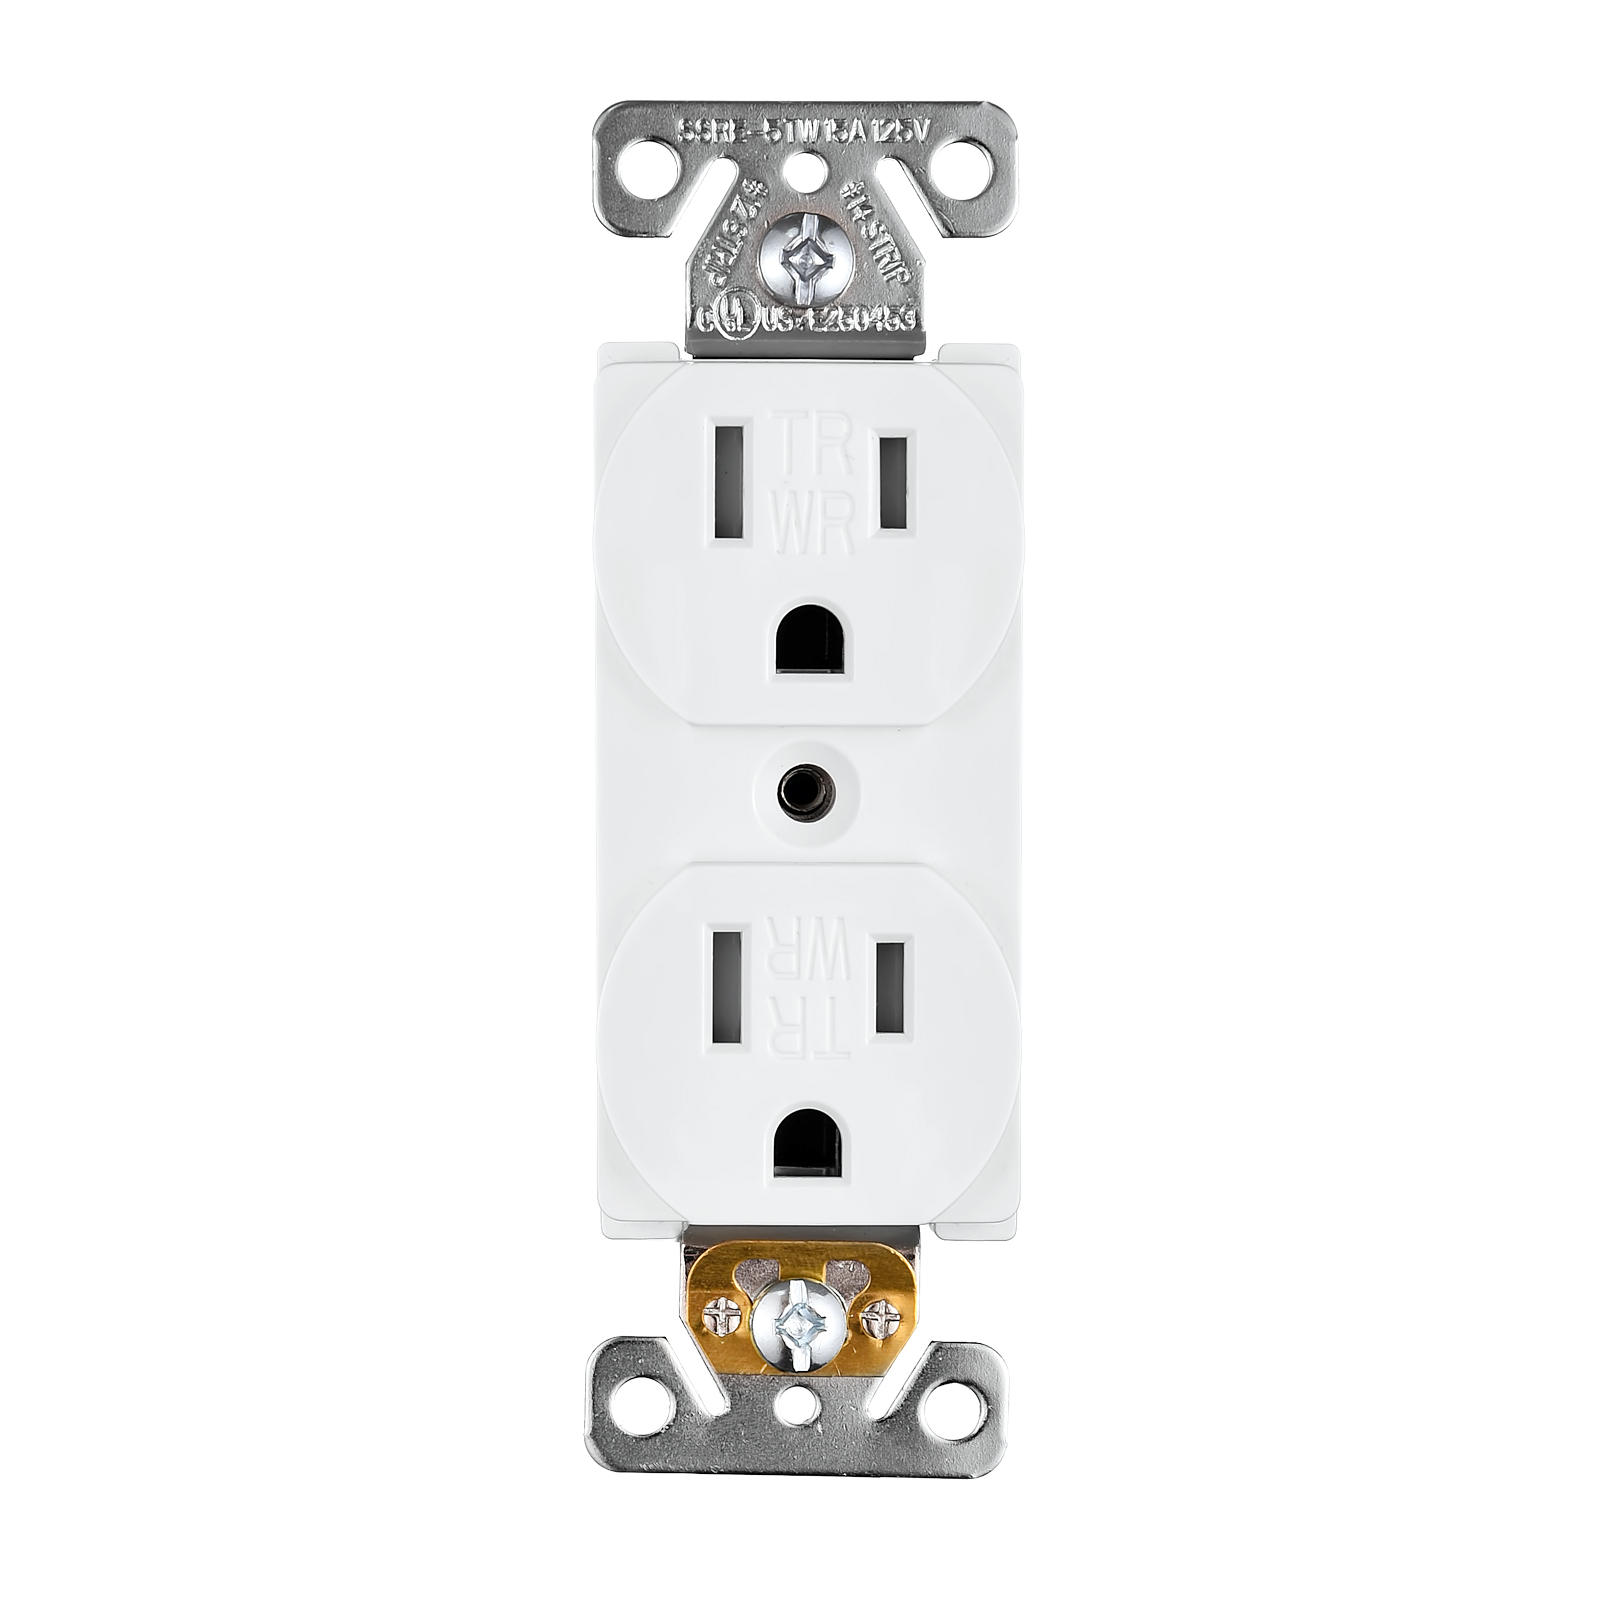 Low MOQ for Inexpensive Receptacles - UL Listed 15 Amp Residential Grade Standard Wall Outlet , Child Proof Weather Resistant Duplex Receptacle – Faith Electric